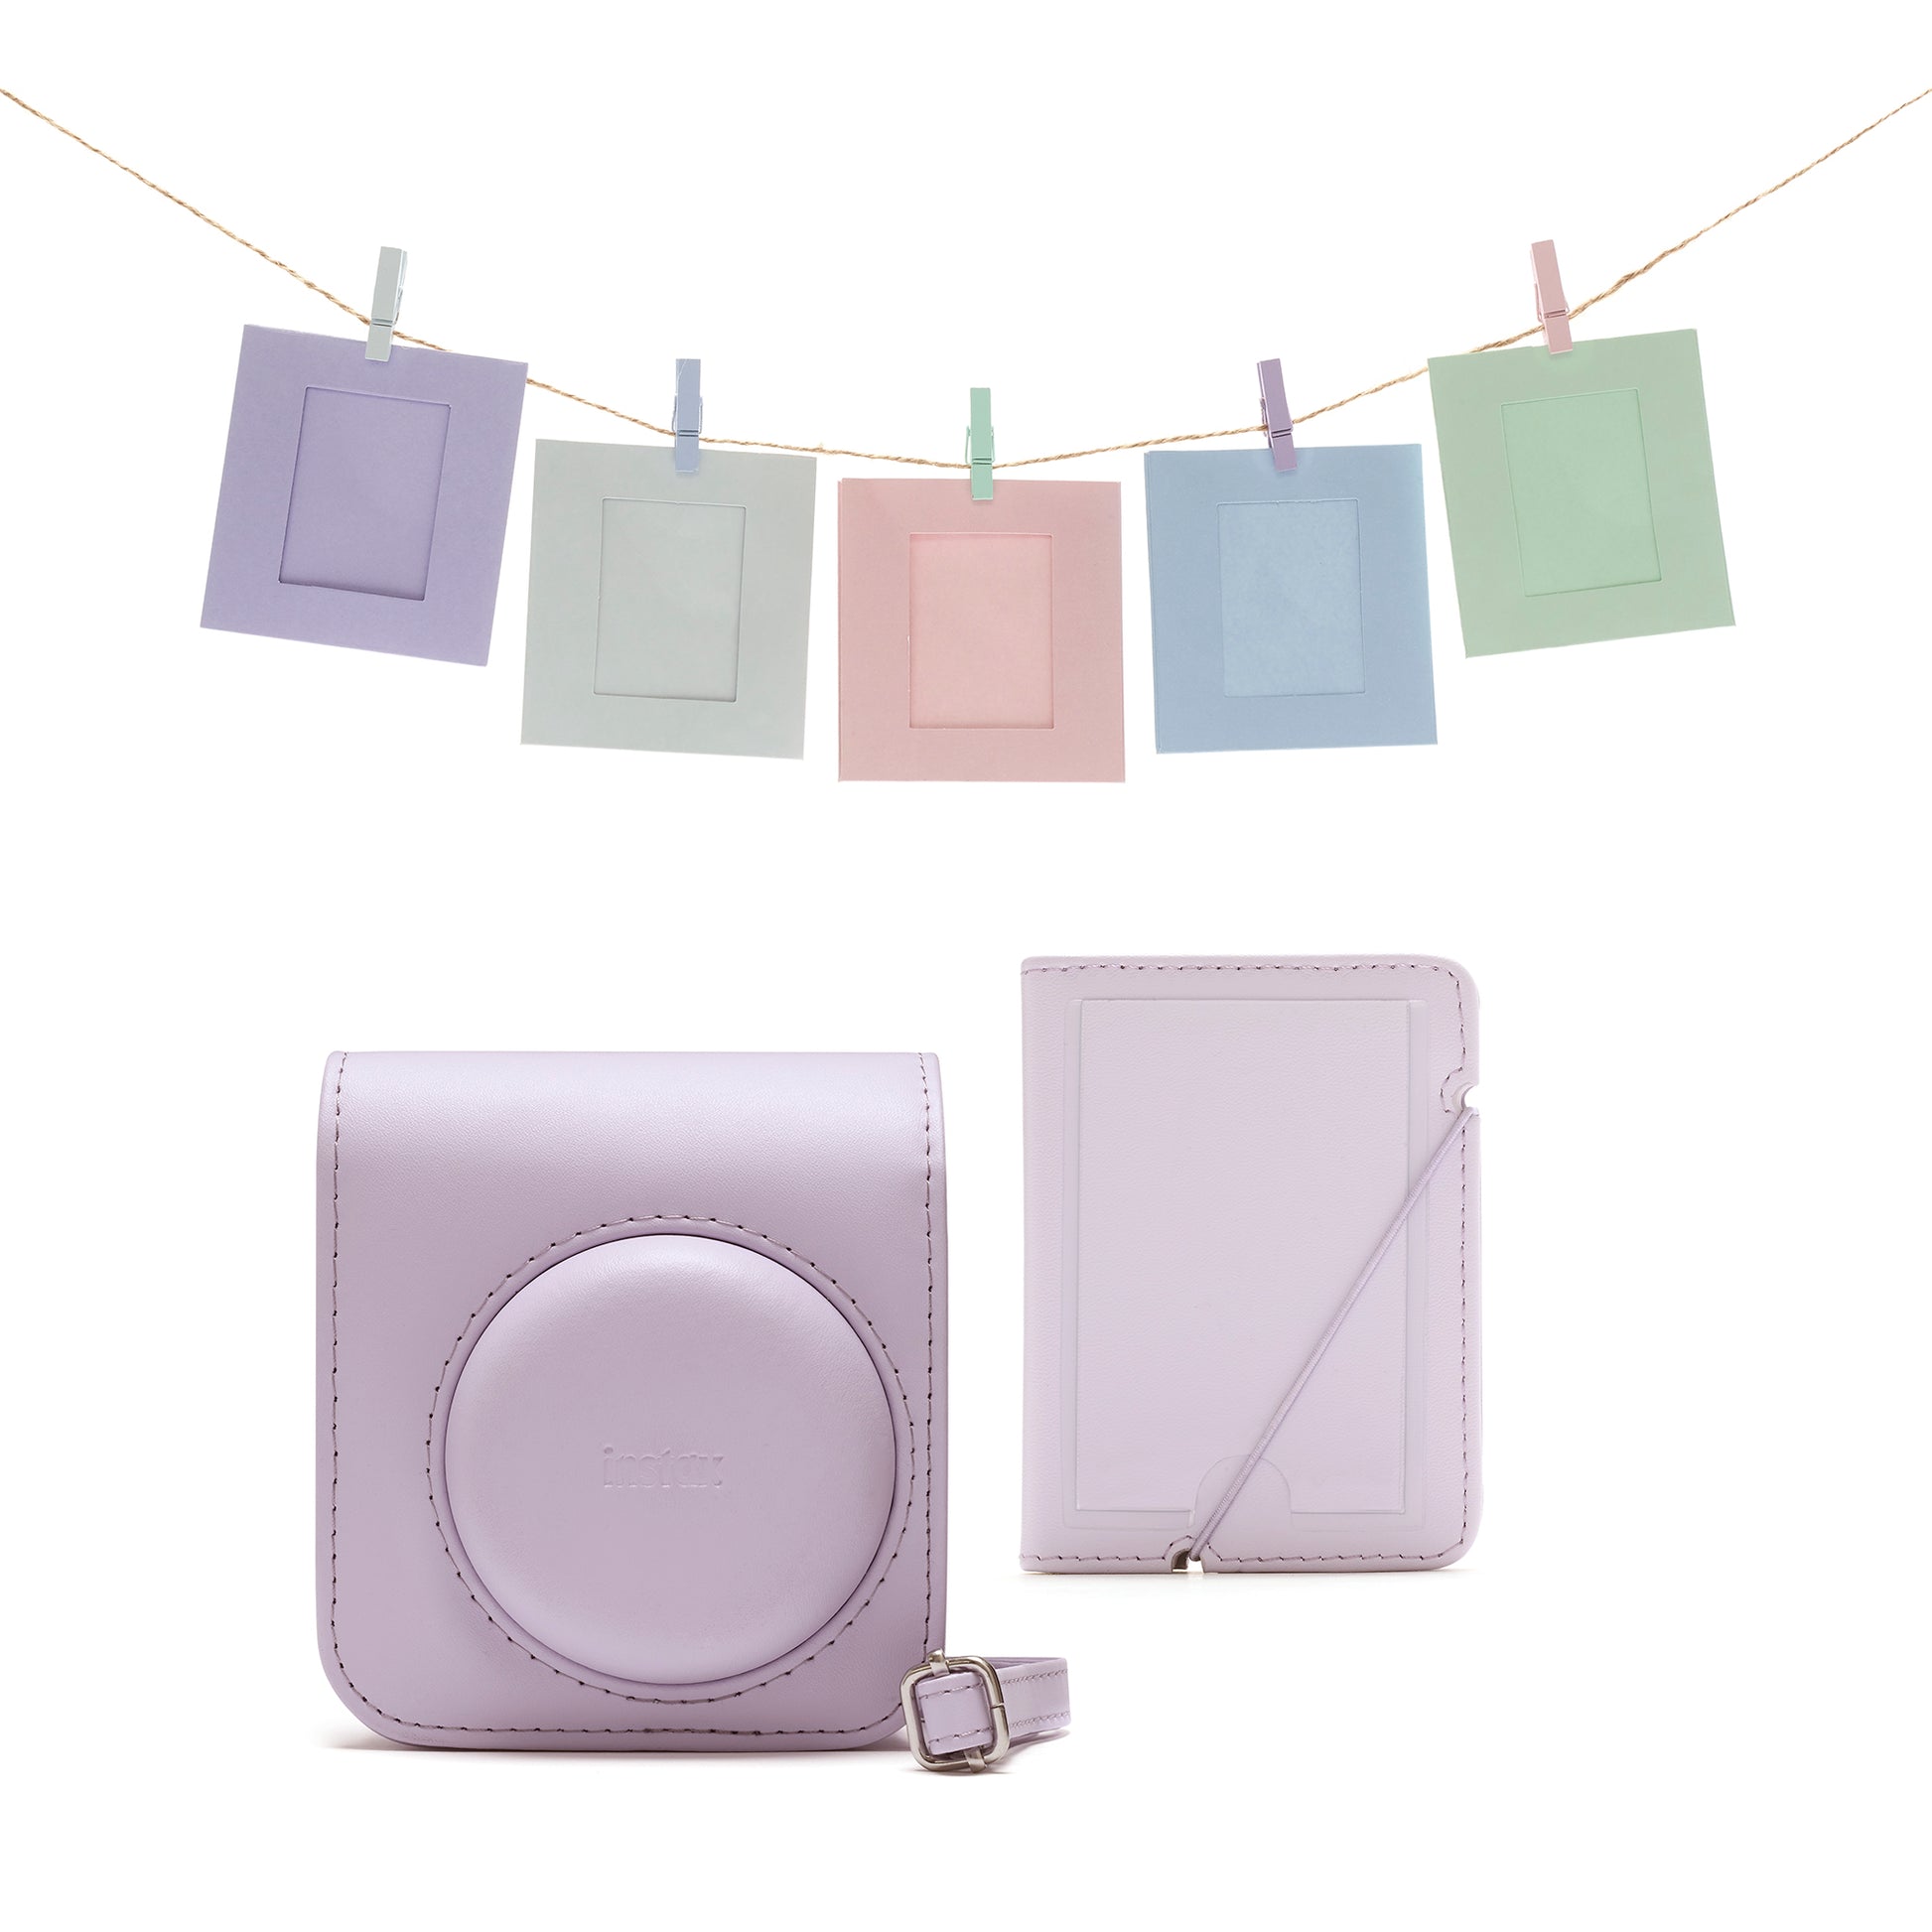 Fujifilm Instax Mini 12 Accessory Kit with Case, Album, Hanging Cards & Pegs - maplin.co.uk